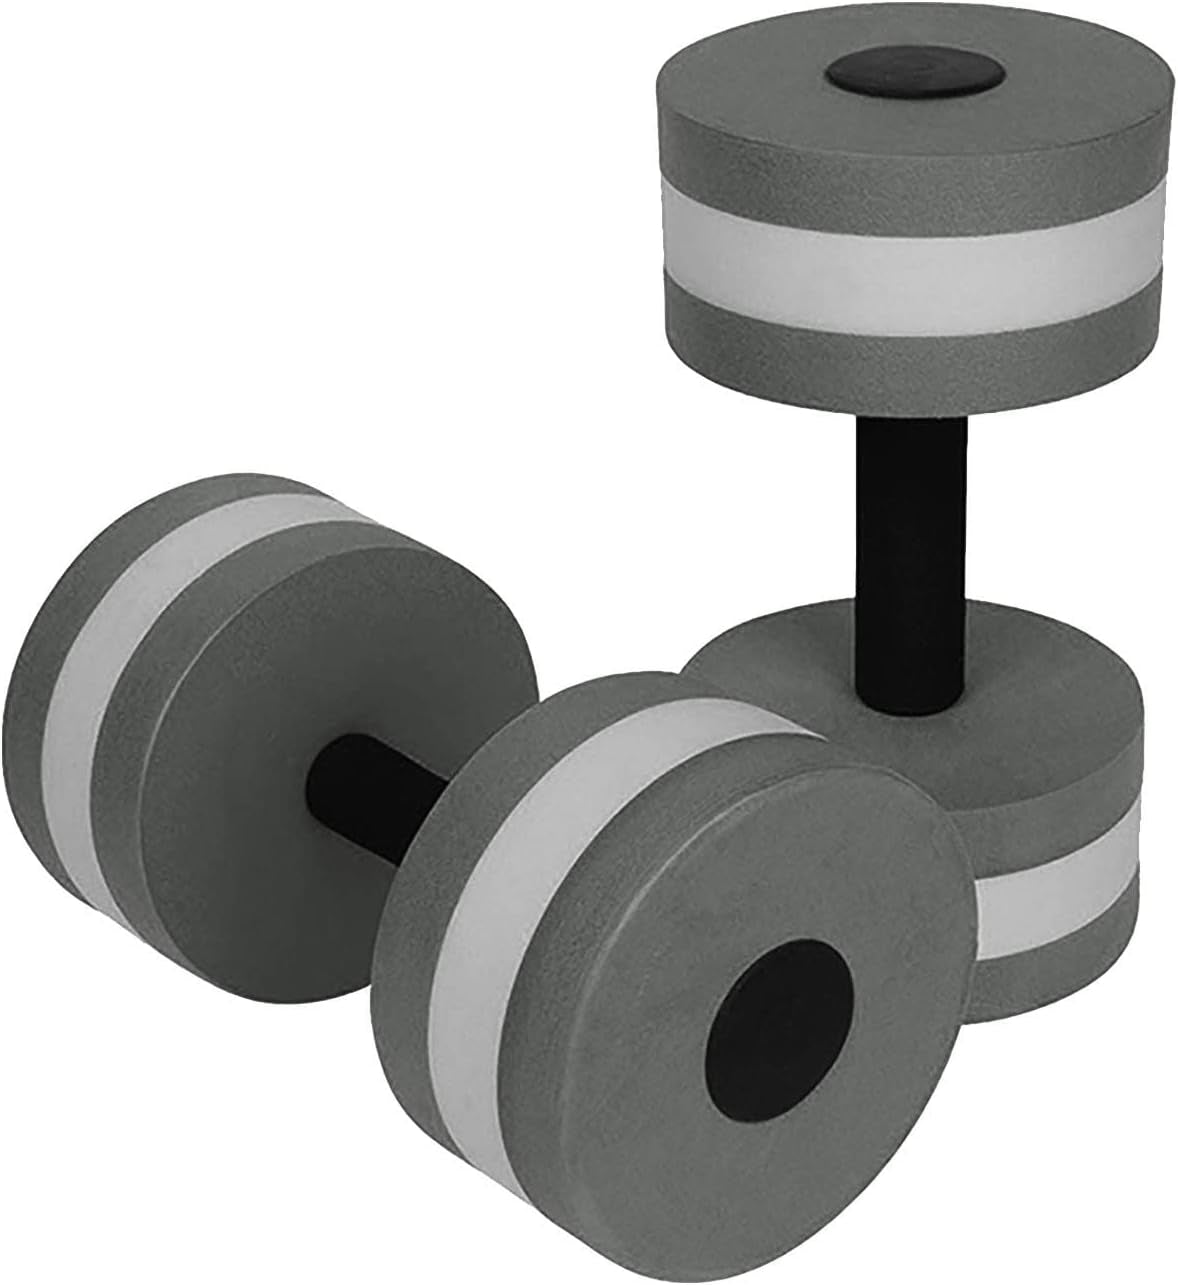 Water Dumbbells, Set of 2 Aquatic Exercise Dumbell, Water Aerobic Exercise Foam Dumbbells Pool Resistance for Men Women Weight Loss Water Sports Fitness Tool